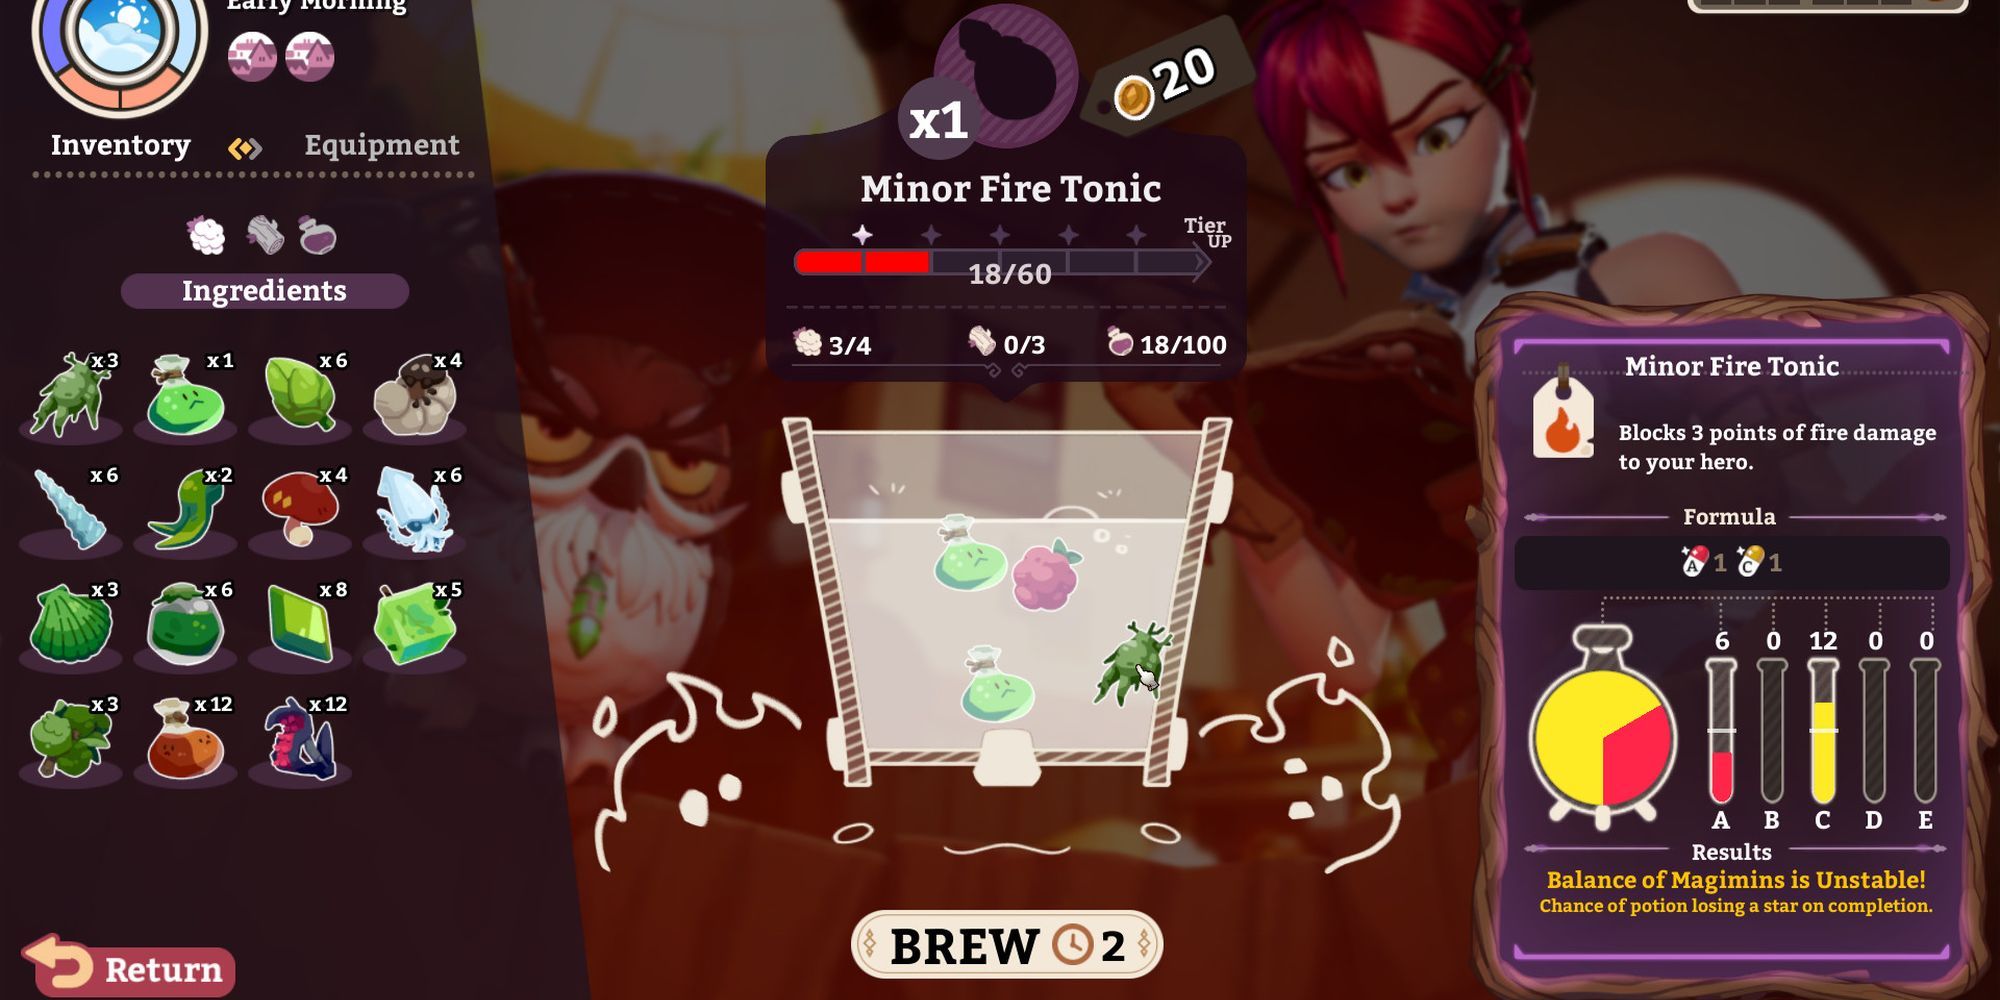 The brewing interface watched by Sylvia and Owl in Potionomics.